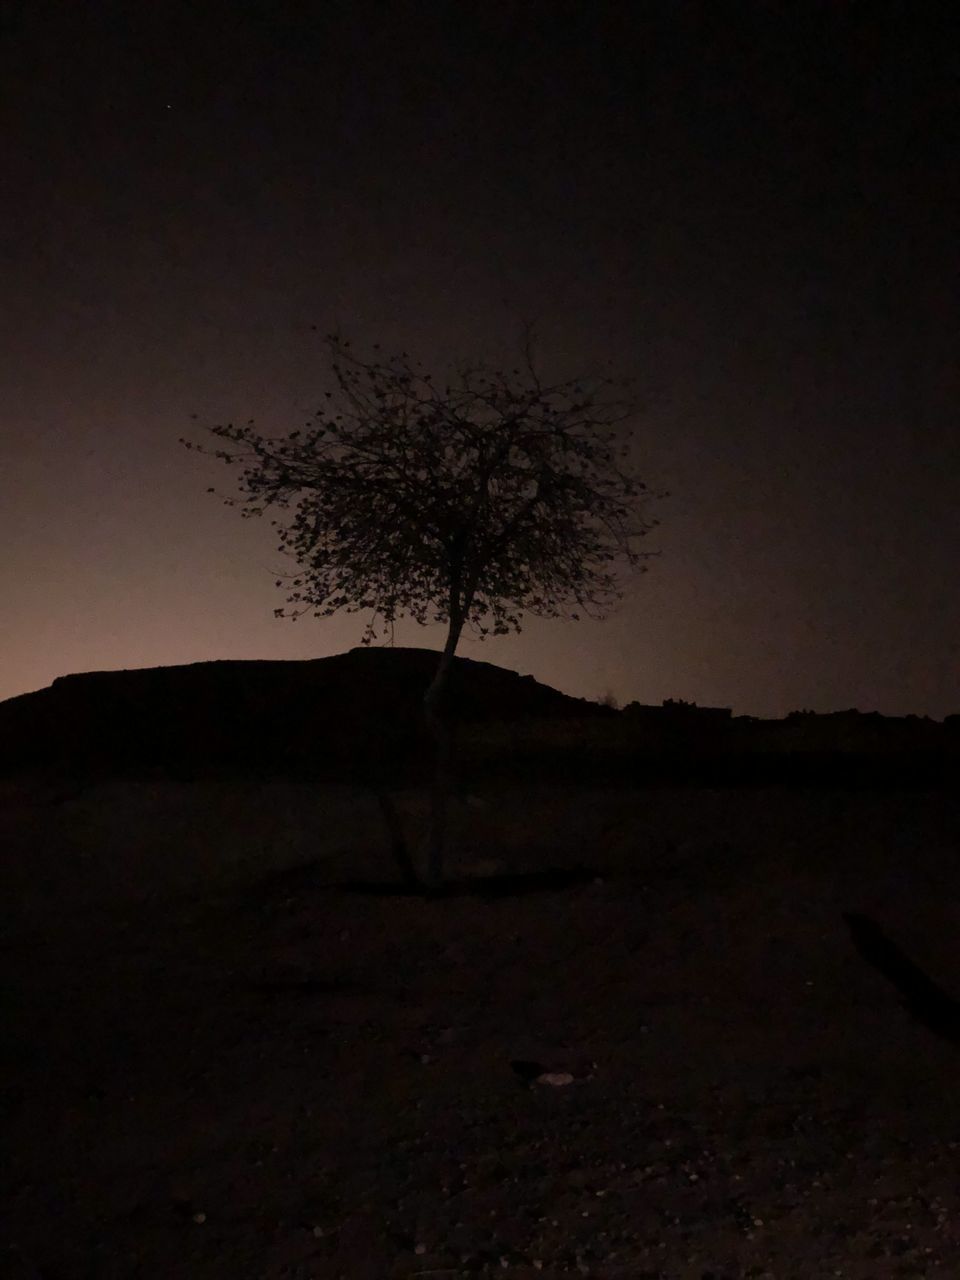 darkness, tree, plant, silhouette, light, nature, night, no people, sky, dark, beauty in nature, outdoors, black, tranquility, fog, tree trunk, moonlight, low angle view, trunk